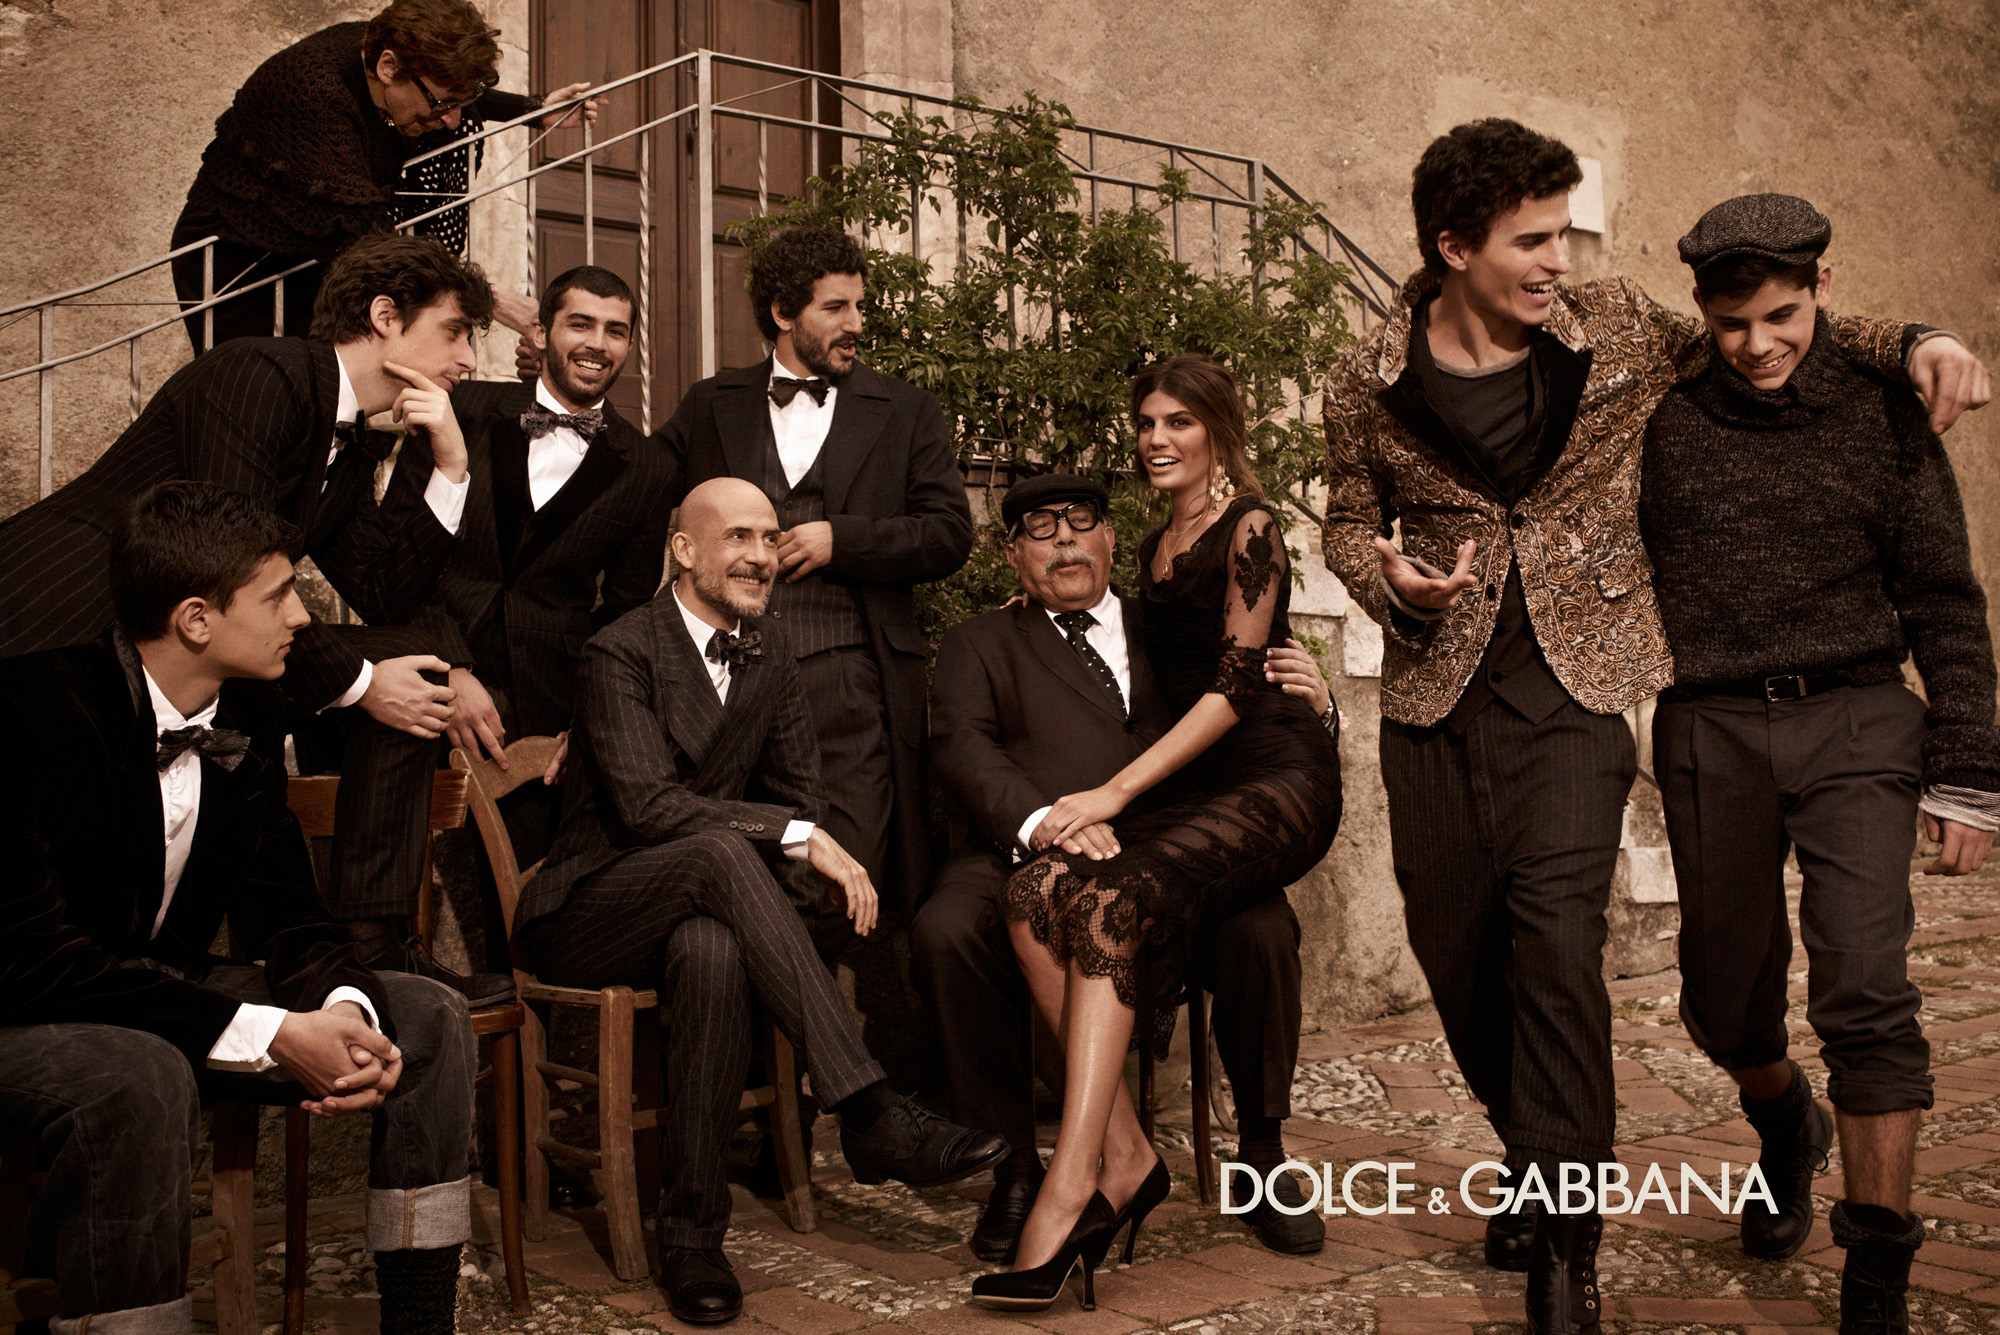 dolce and gabbana new advert